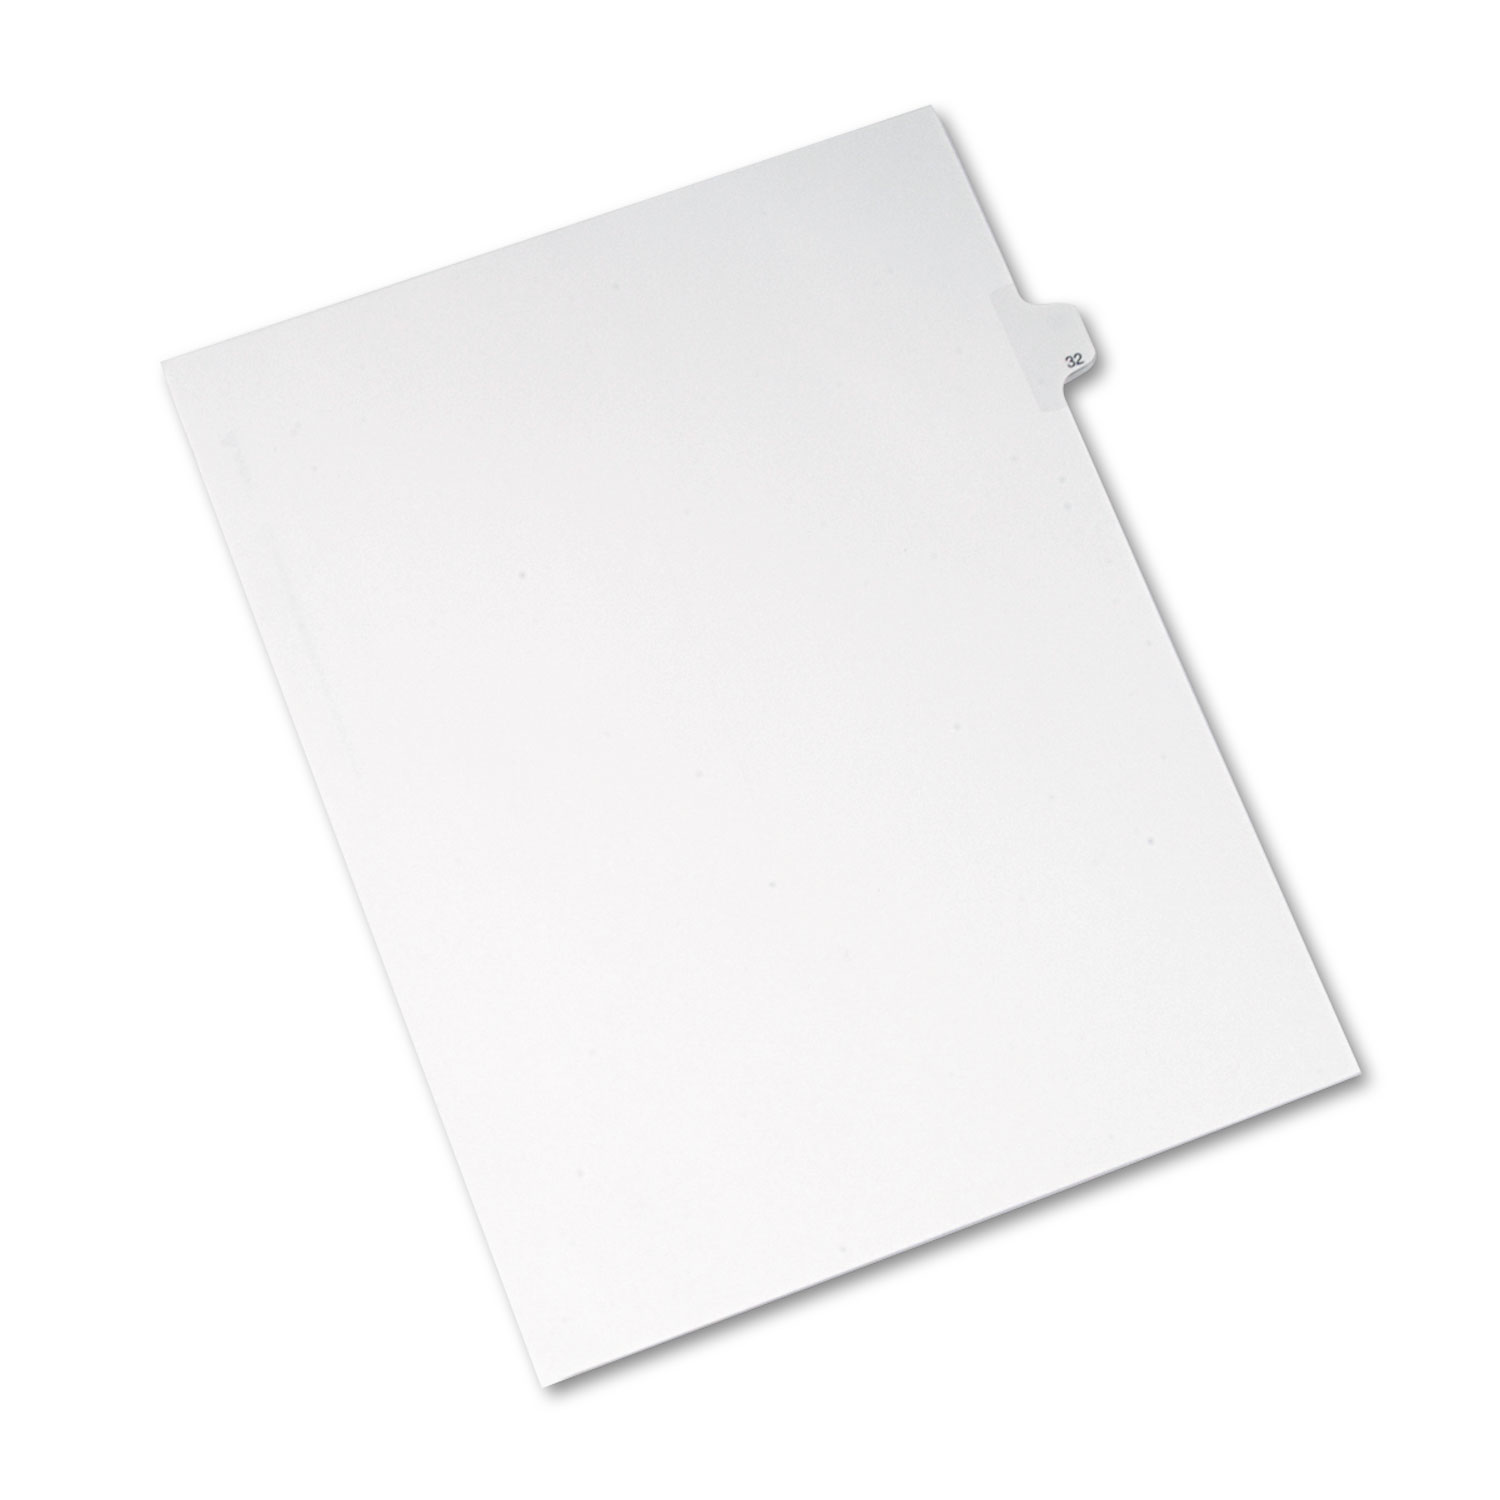 Allstate-Style Legal Exhibit Side Tab Divider, Title: 32, Letter, White, 25/Pack